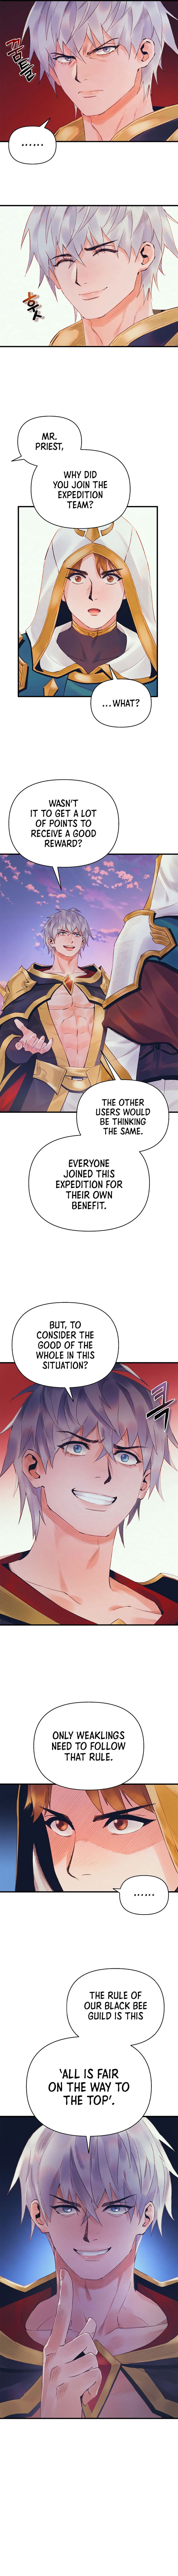 the-healing-priest-of-the-sun-chap-30-7